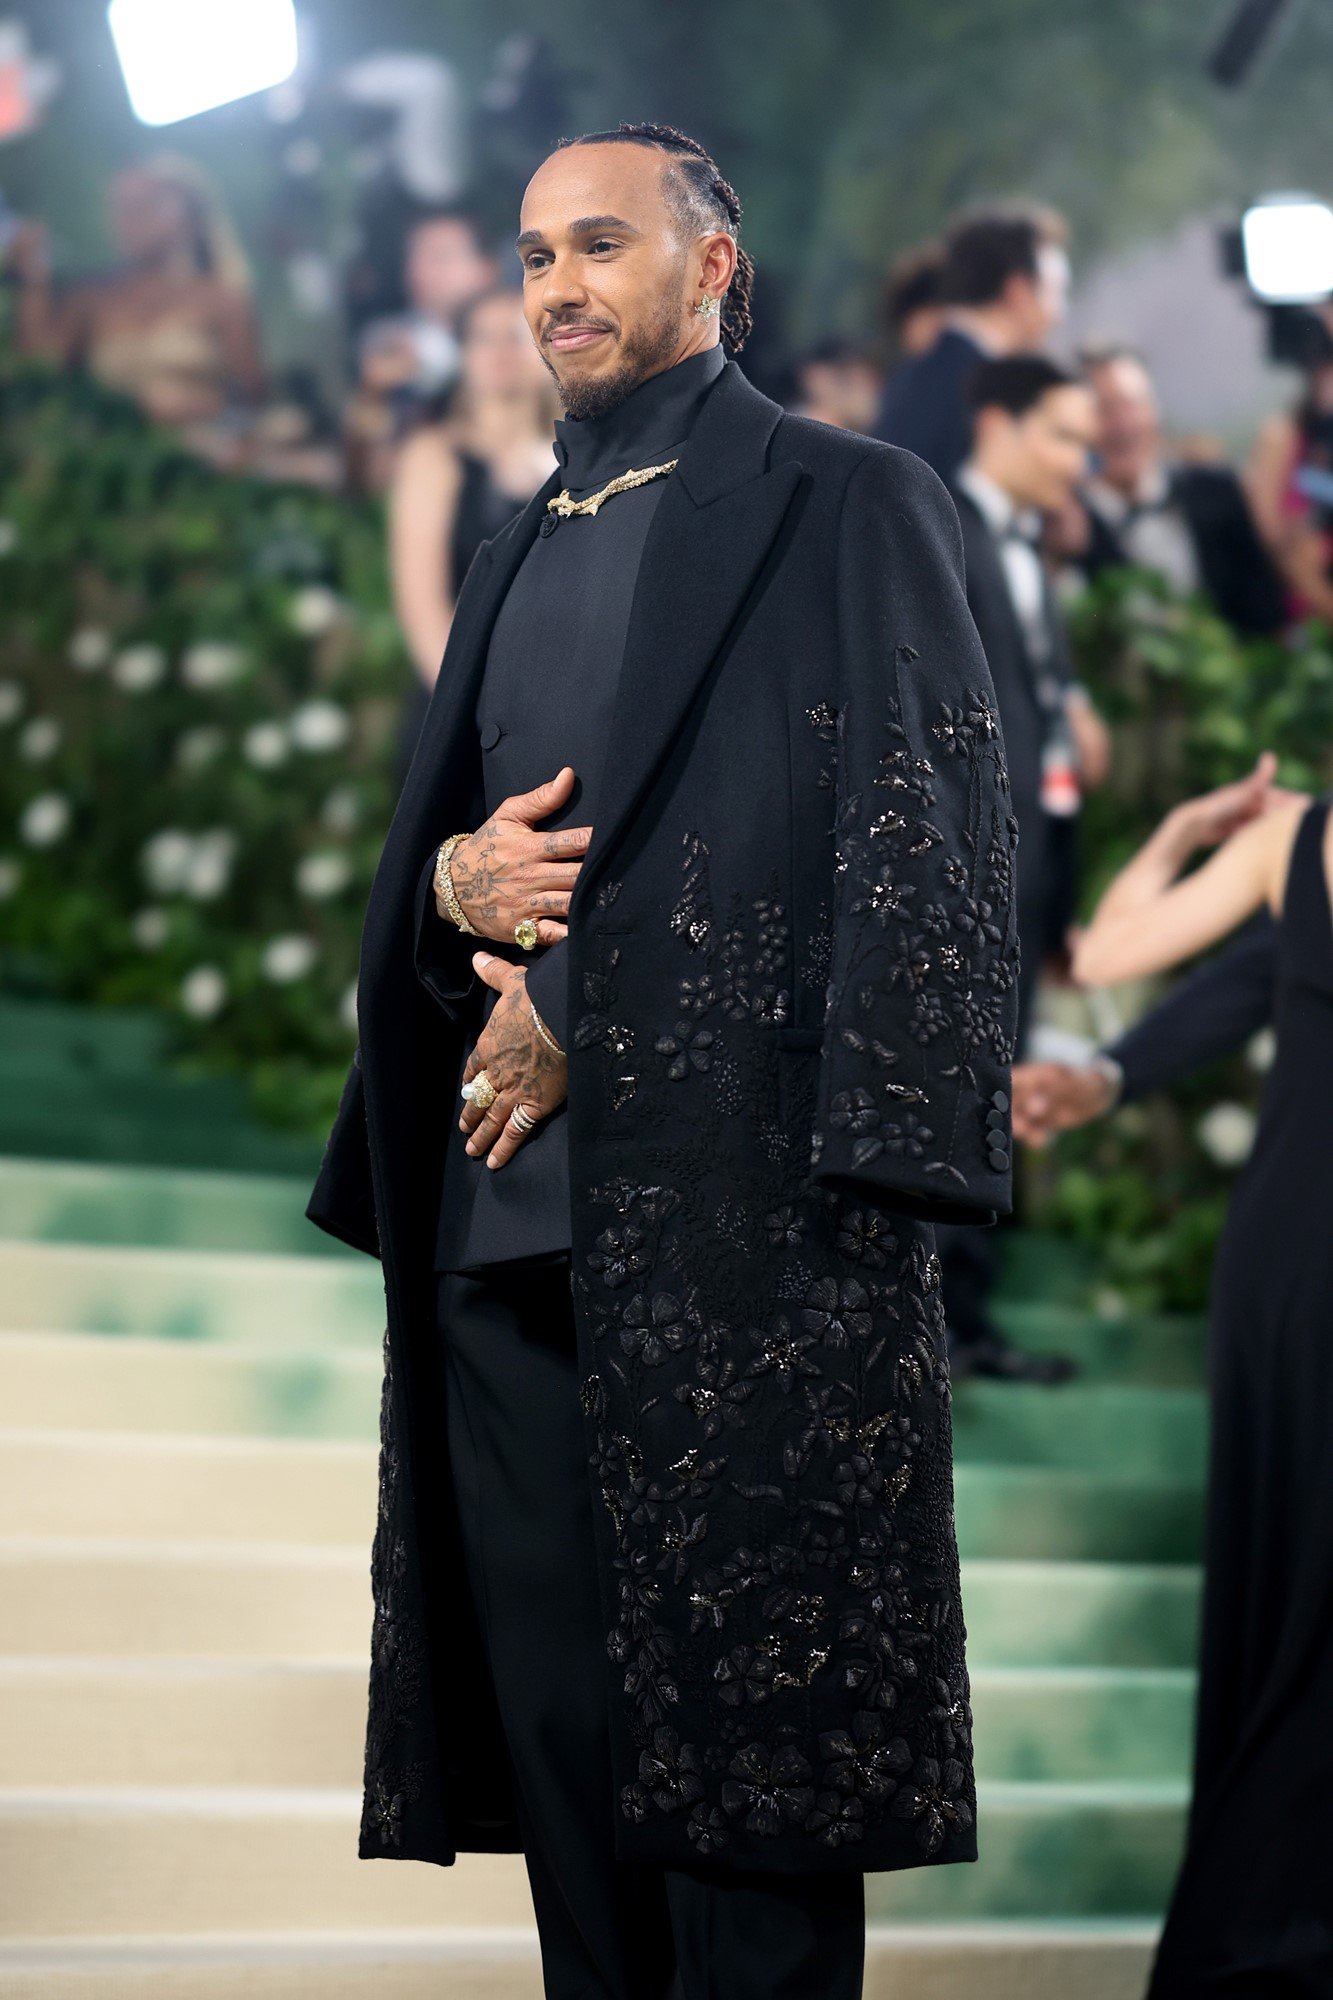 Hamilton poses on the steps in a black embroided coat.